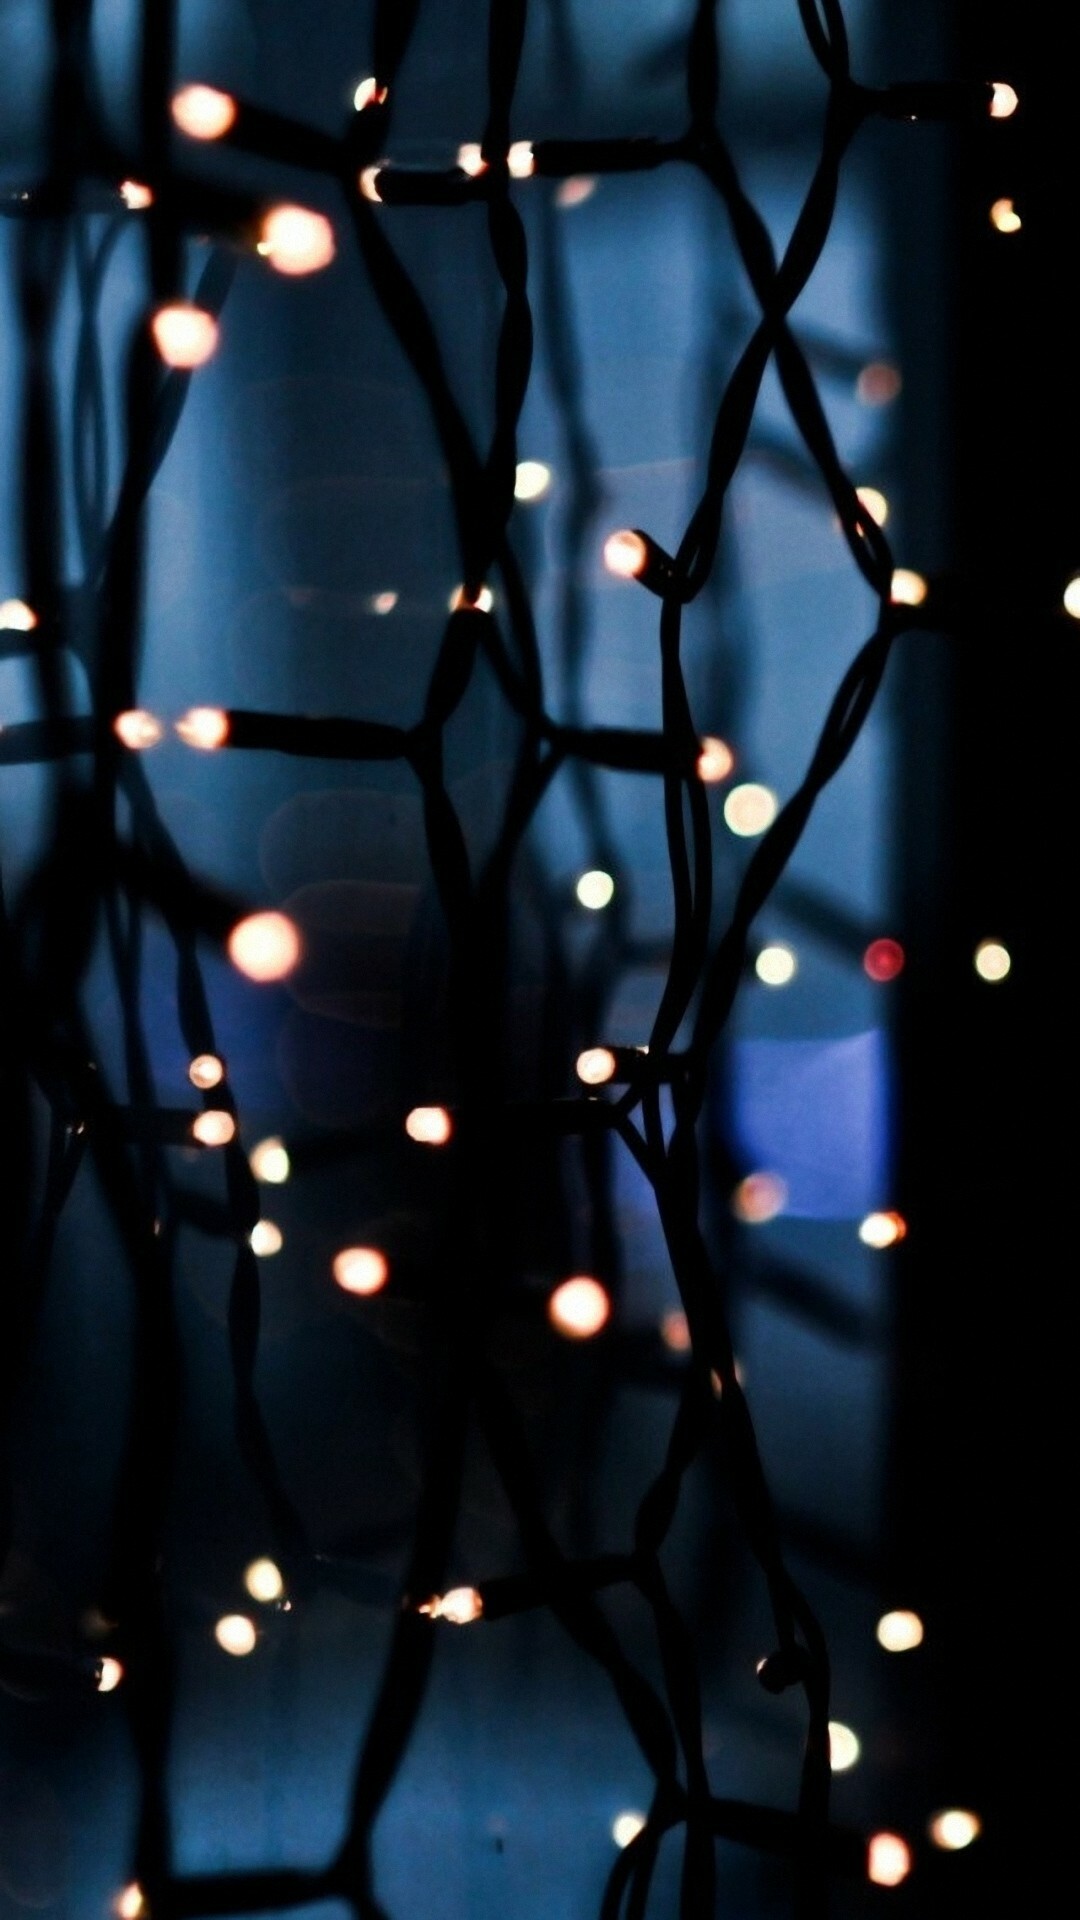 Fairy Lights: Small colored electric bulbs strung together and used for decoration. 1080x1920 Full HD Background.